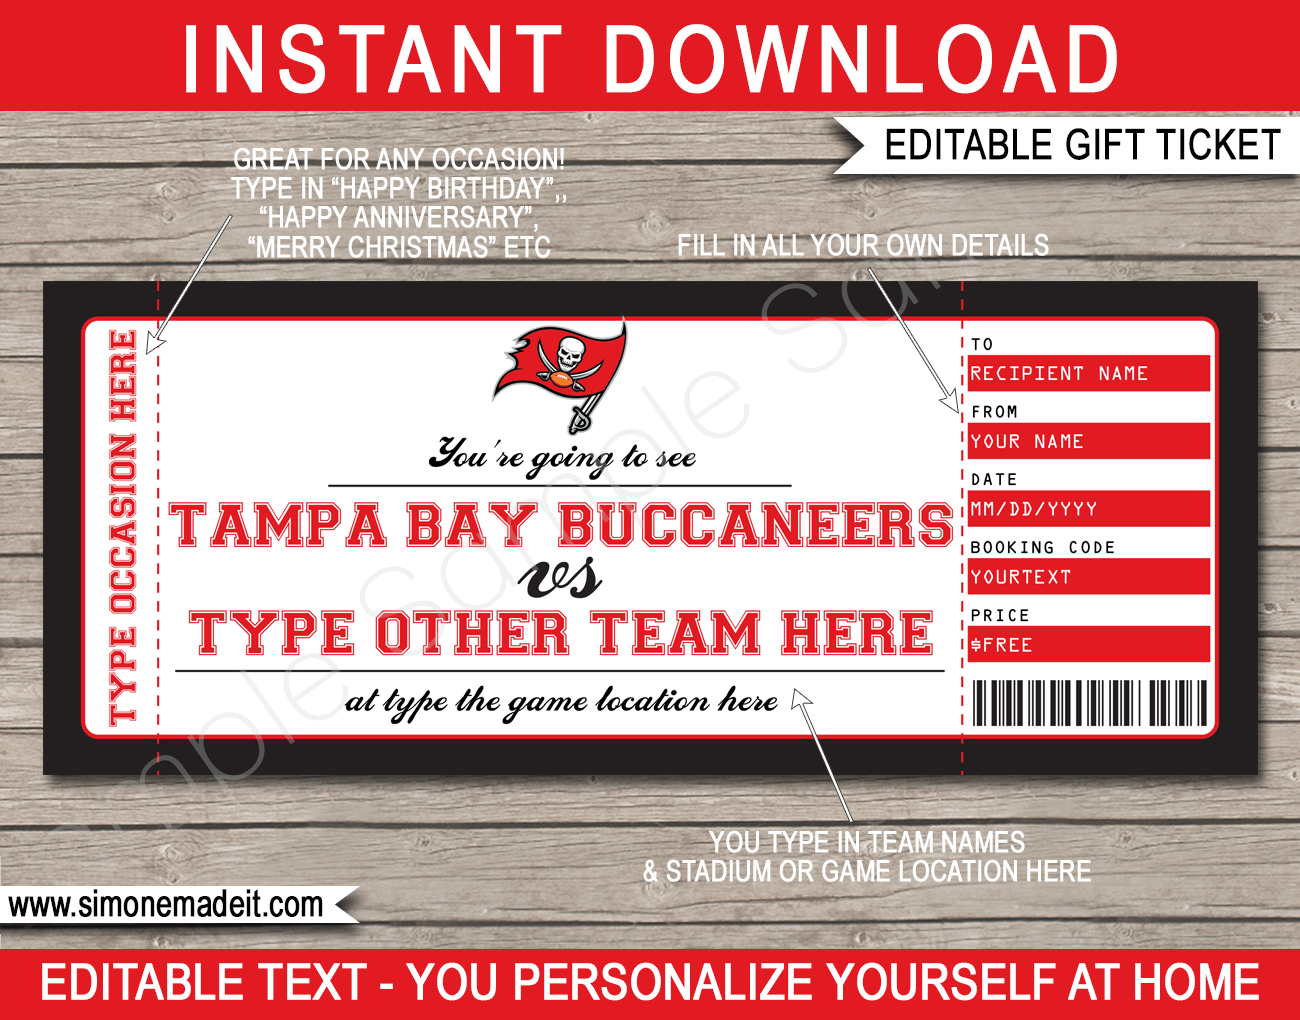 NFL Game Tickets Gift Vouchers Printable Templates Choose Your Team